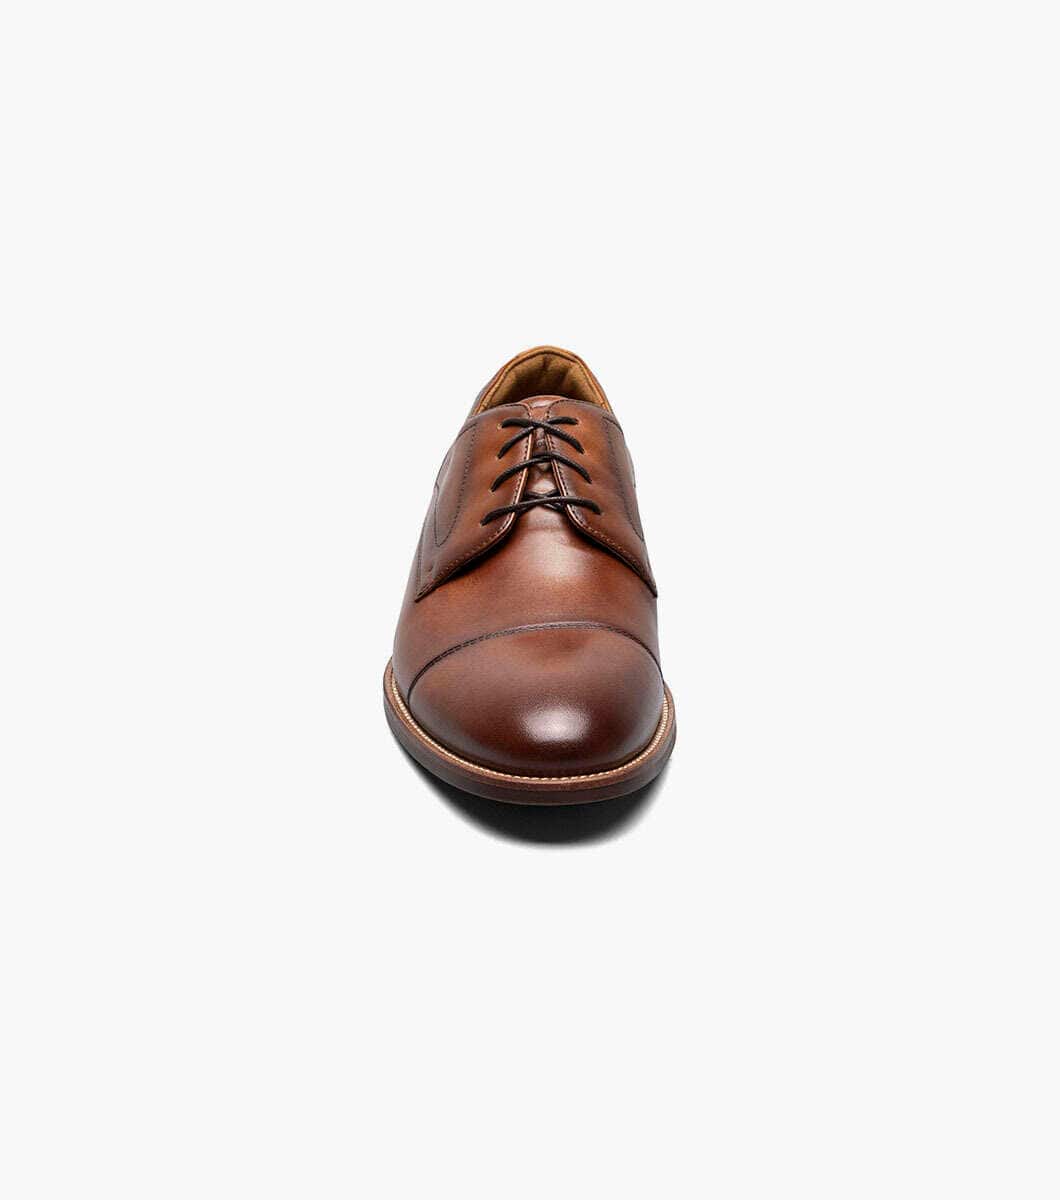 Rucci Cap Oxford product image